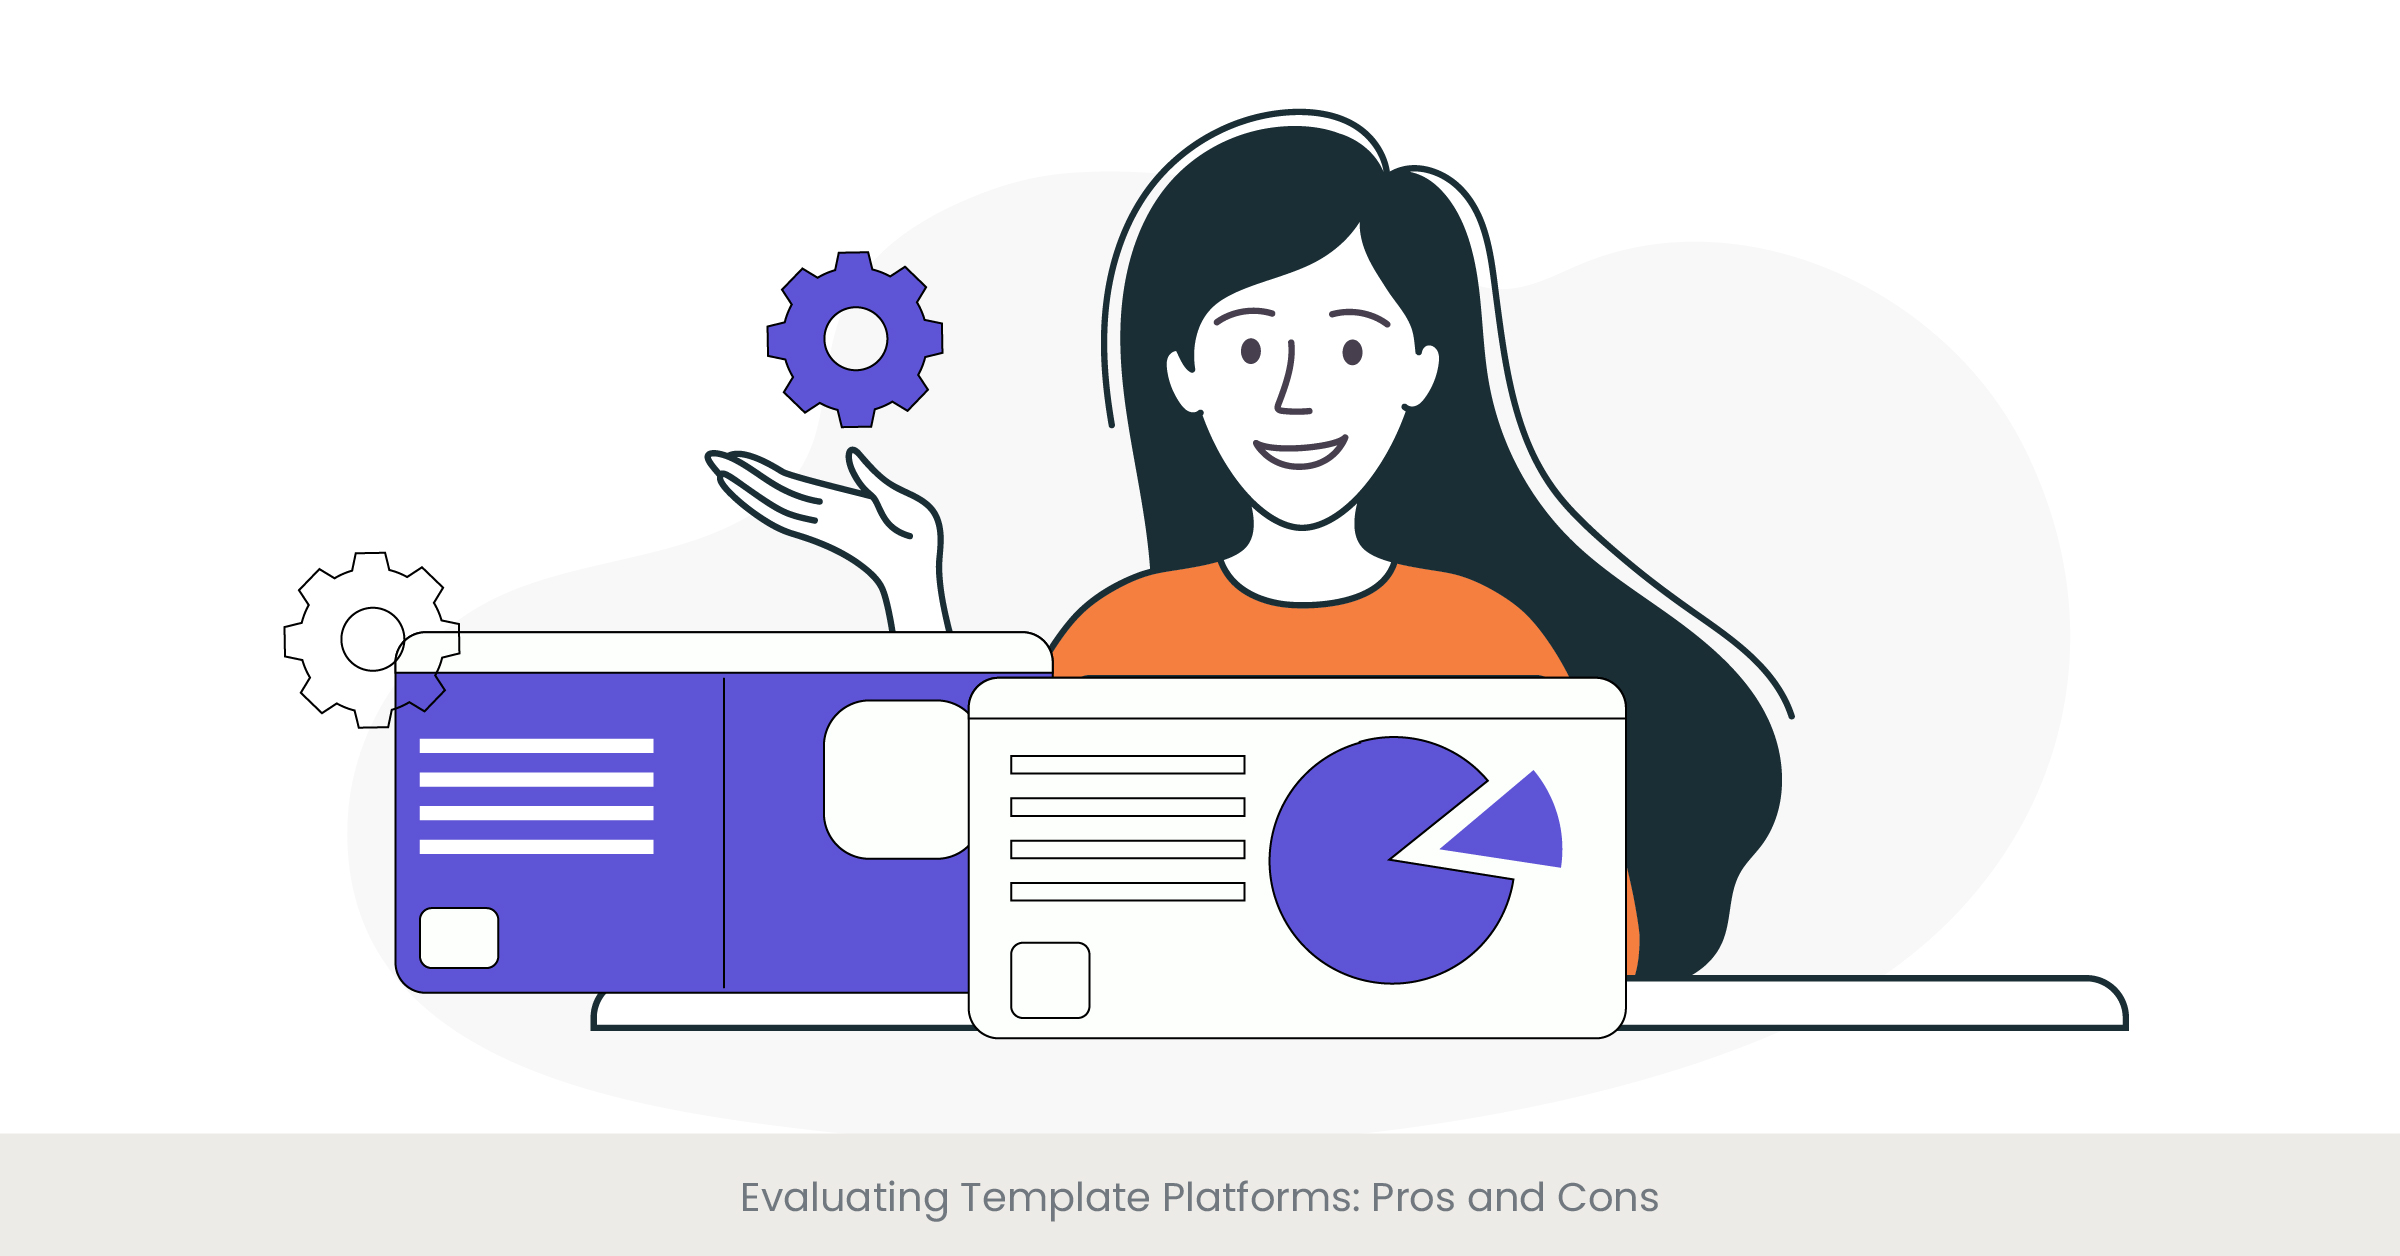 Evaluating Template Platforms: Pros and Cons